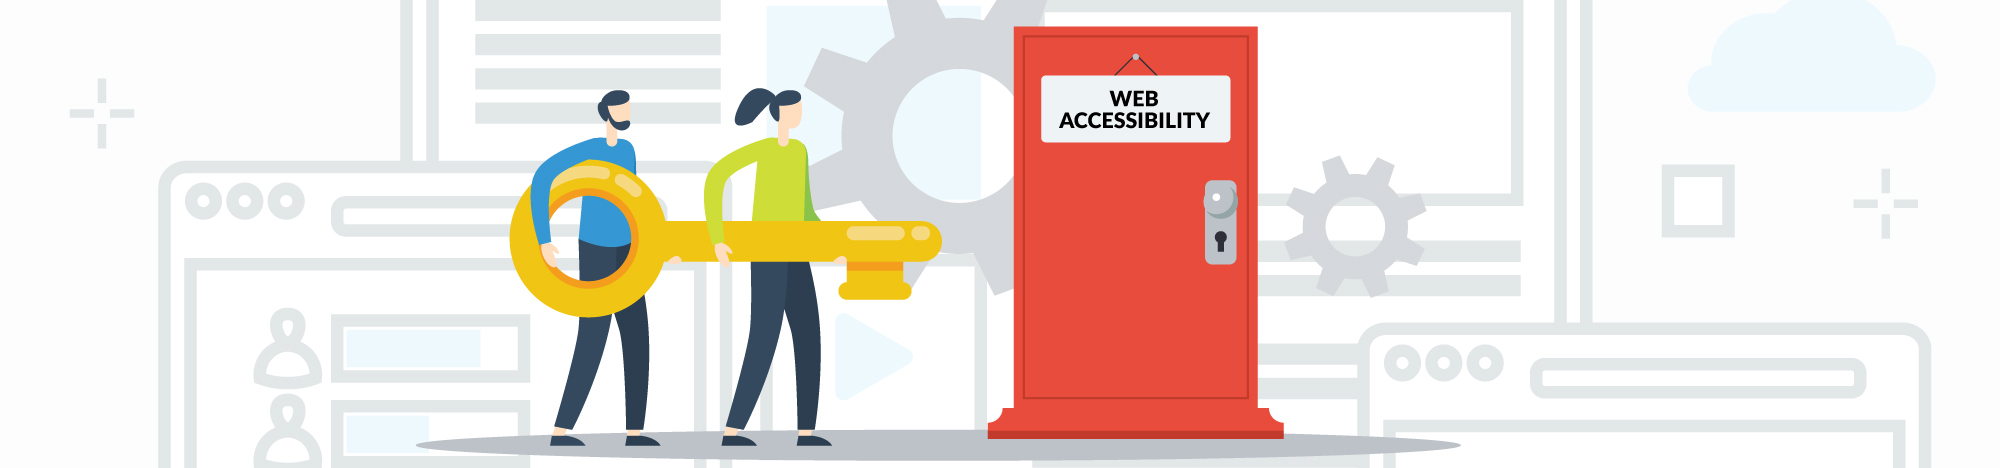 Live Webinar Event: Accessibility for Websites and Web Apps banner